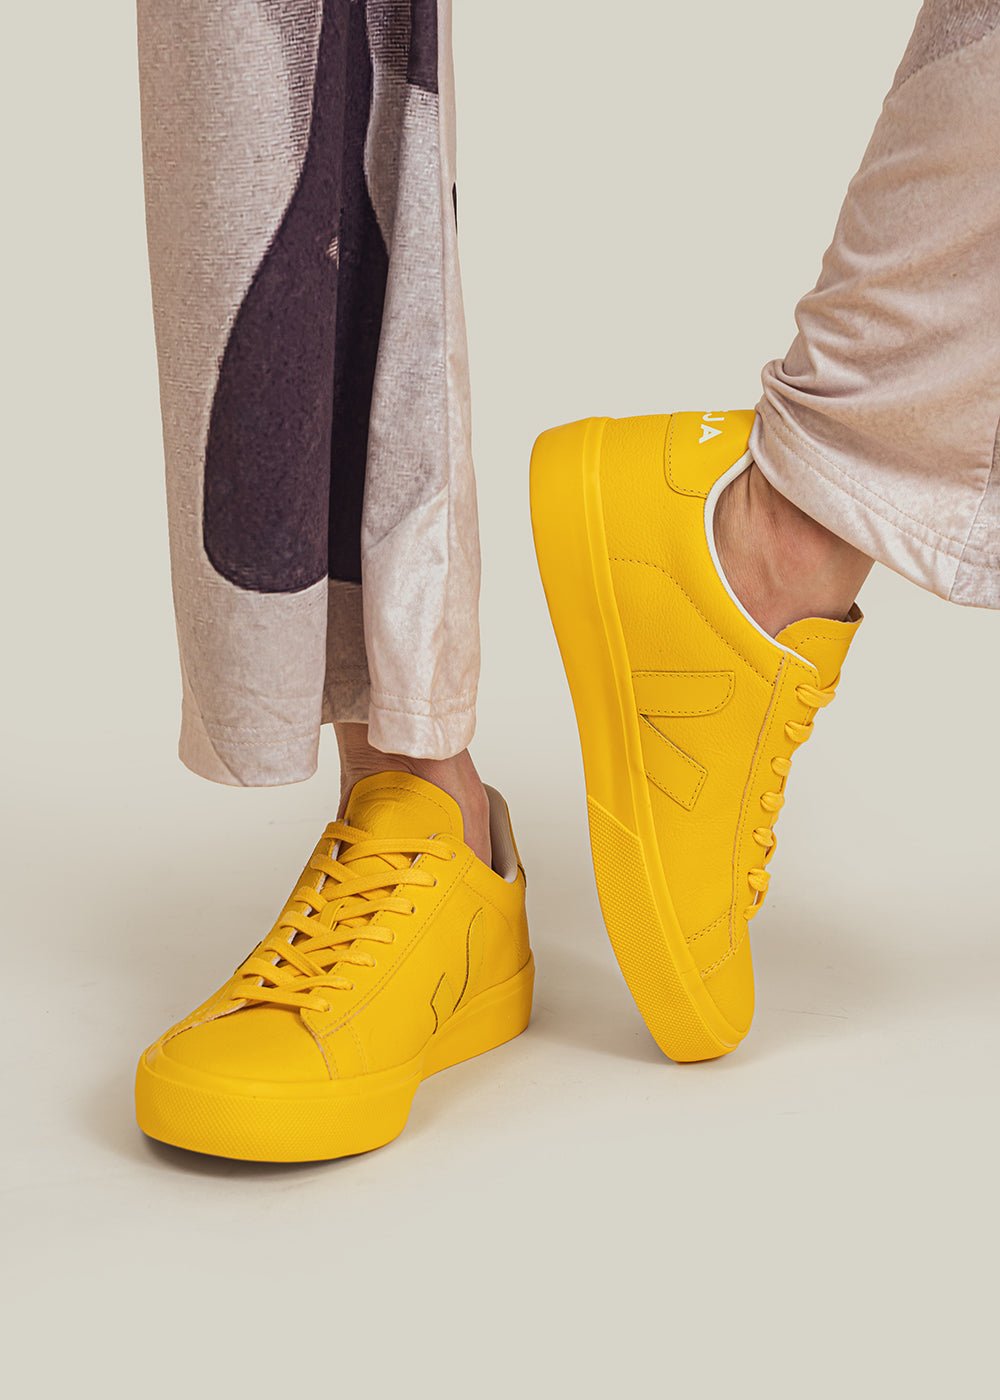 Veja Sunshine Campo Sneaker - New Classics Studios Sustainable Ethical Fashion Canada